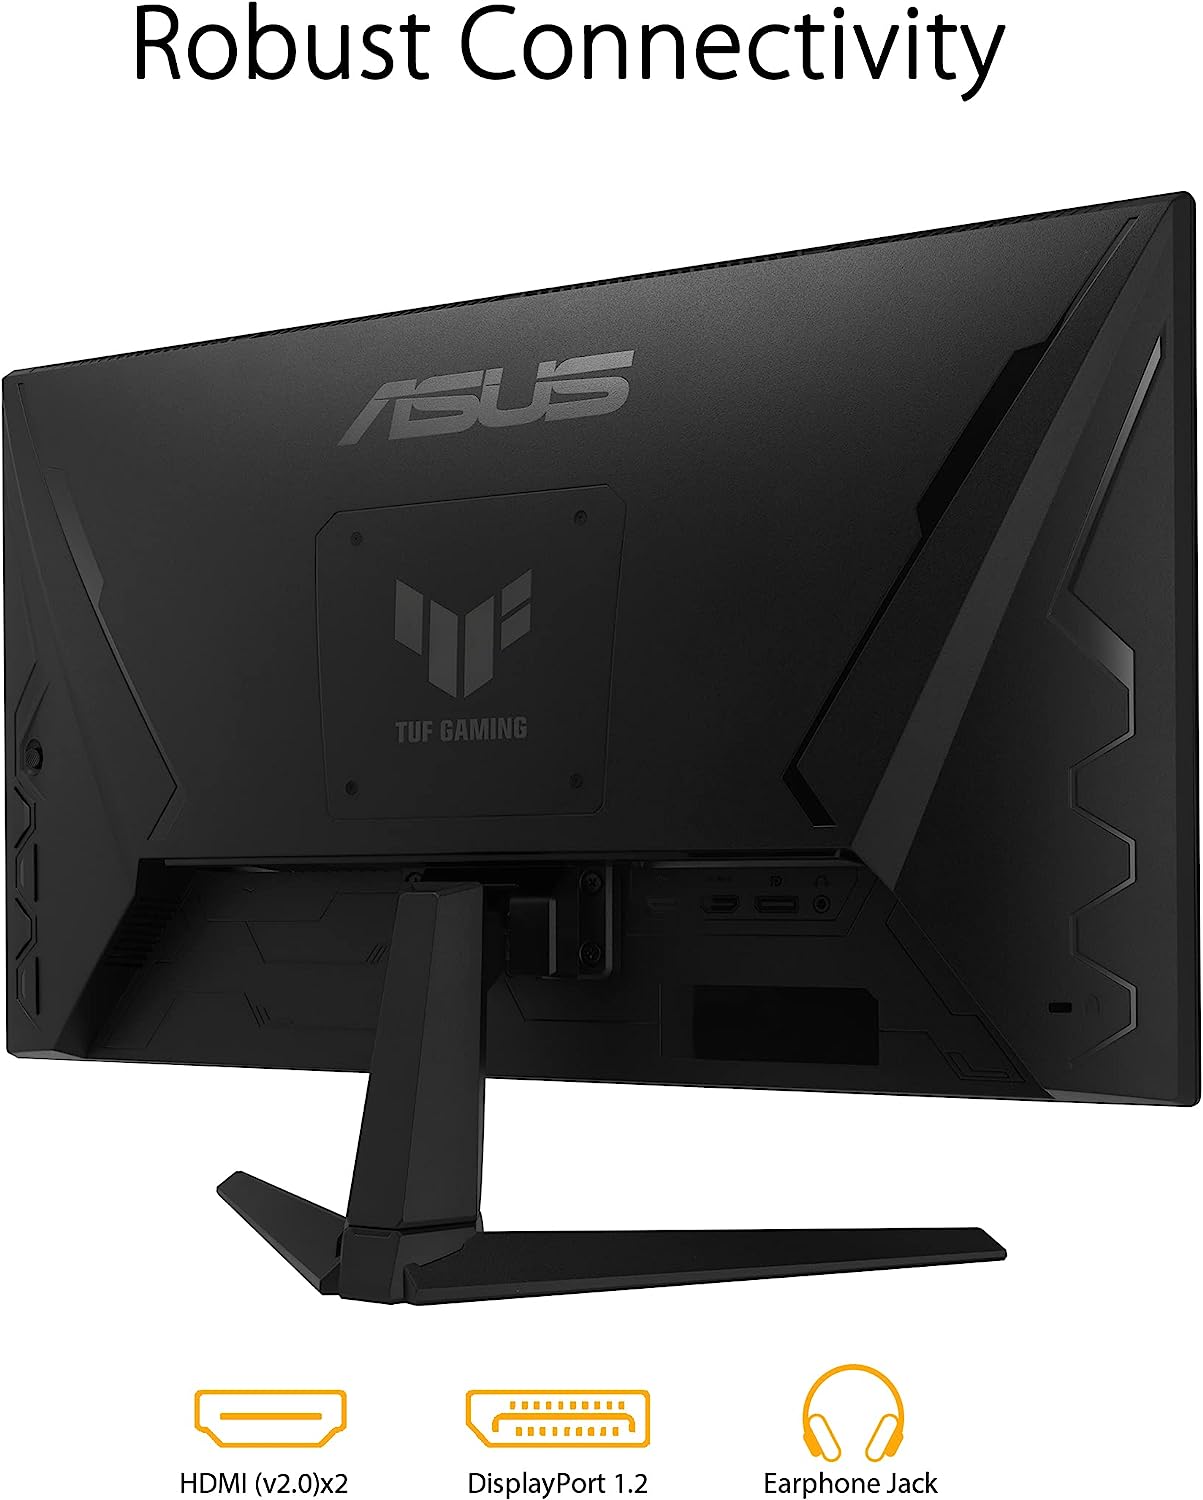 ASUS TUF Gaming VG249QM1A 24 inch FHD , IPS, 270 Hz Gaming Monitor